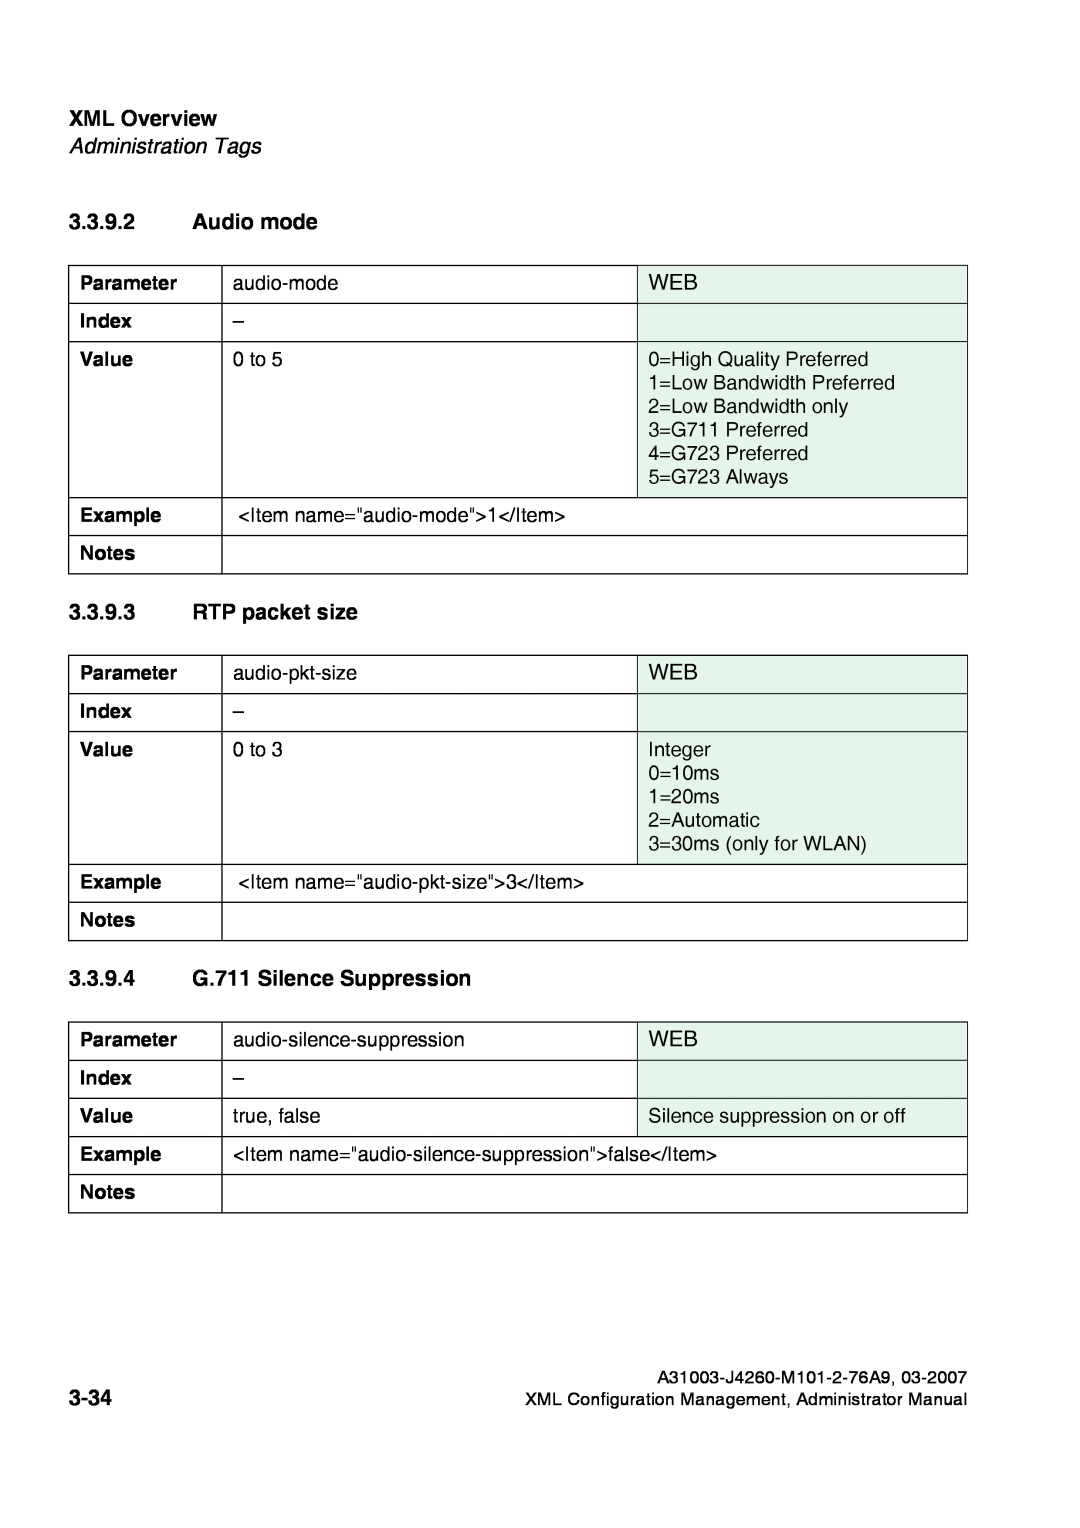 Siemens 420 S V6.0 Audio mode, RTP packet size, 3.3.9.4 G.711 Silence Suppression, 3-34, XML Overview, Administration Tags 